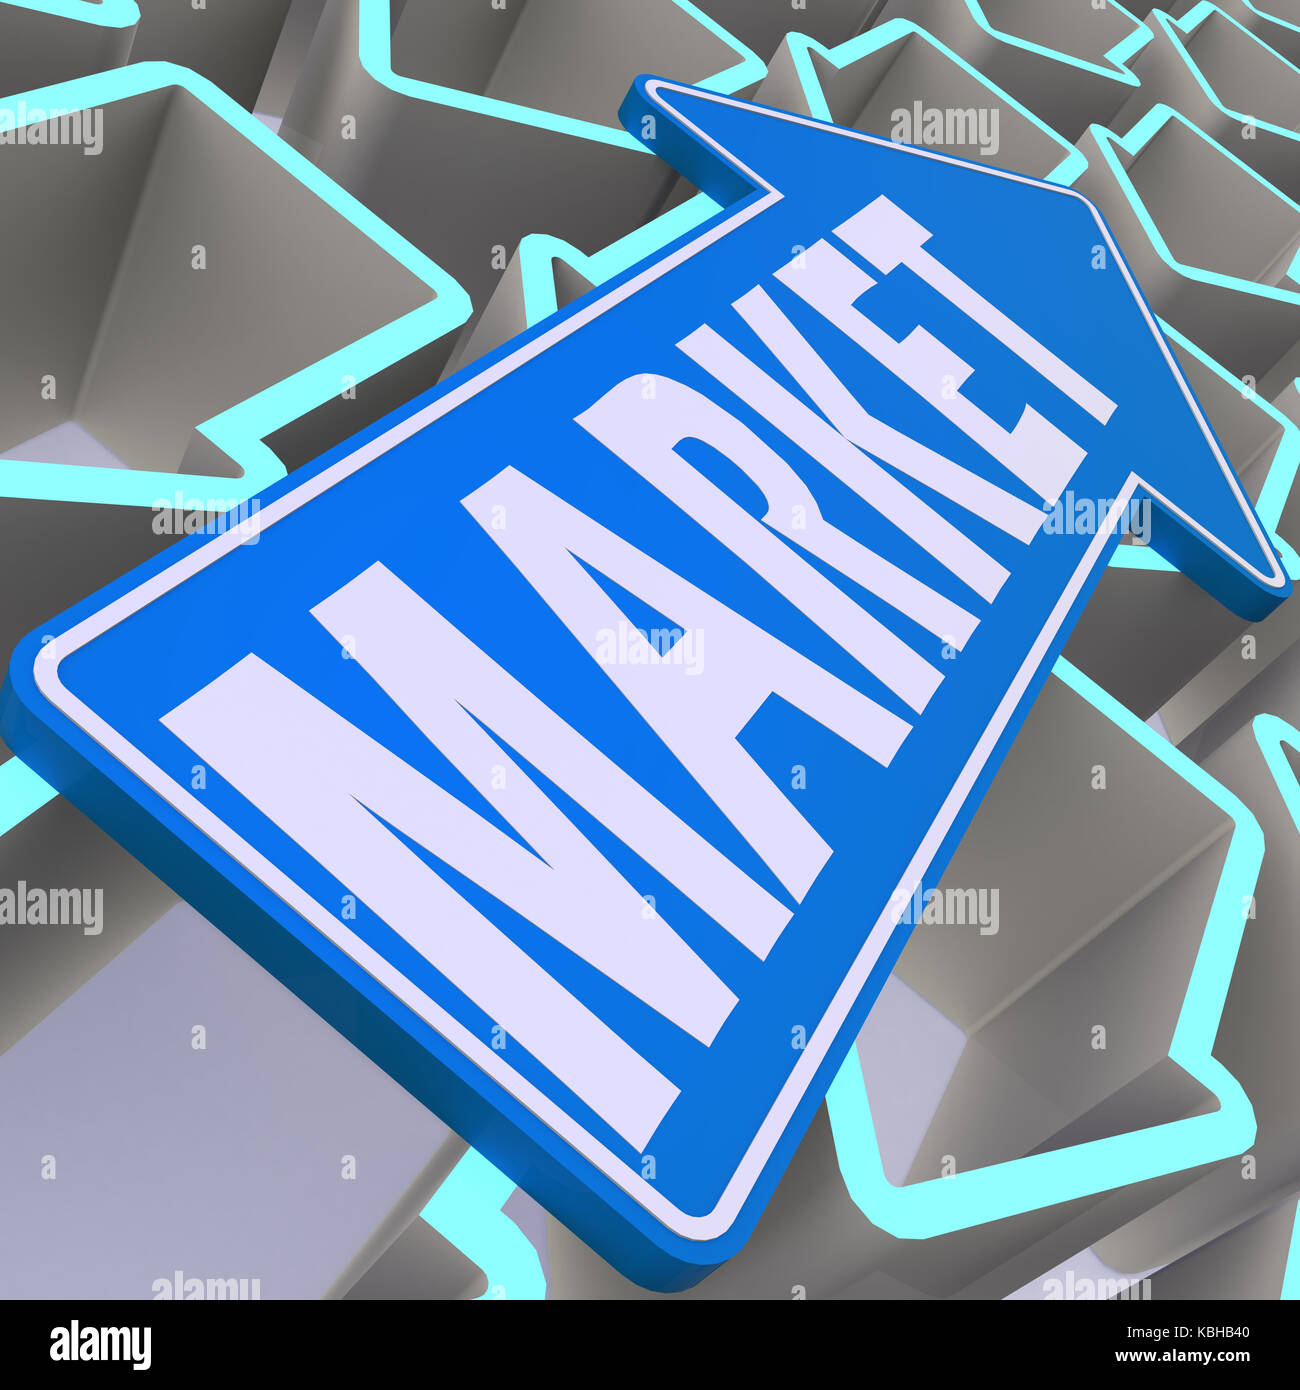 Market word on blue arrow image with hi-res rendered artwork that could be used for any graphic design. Stock Photo